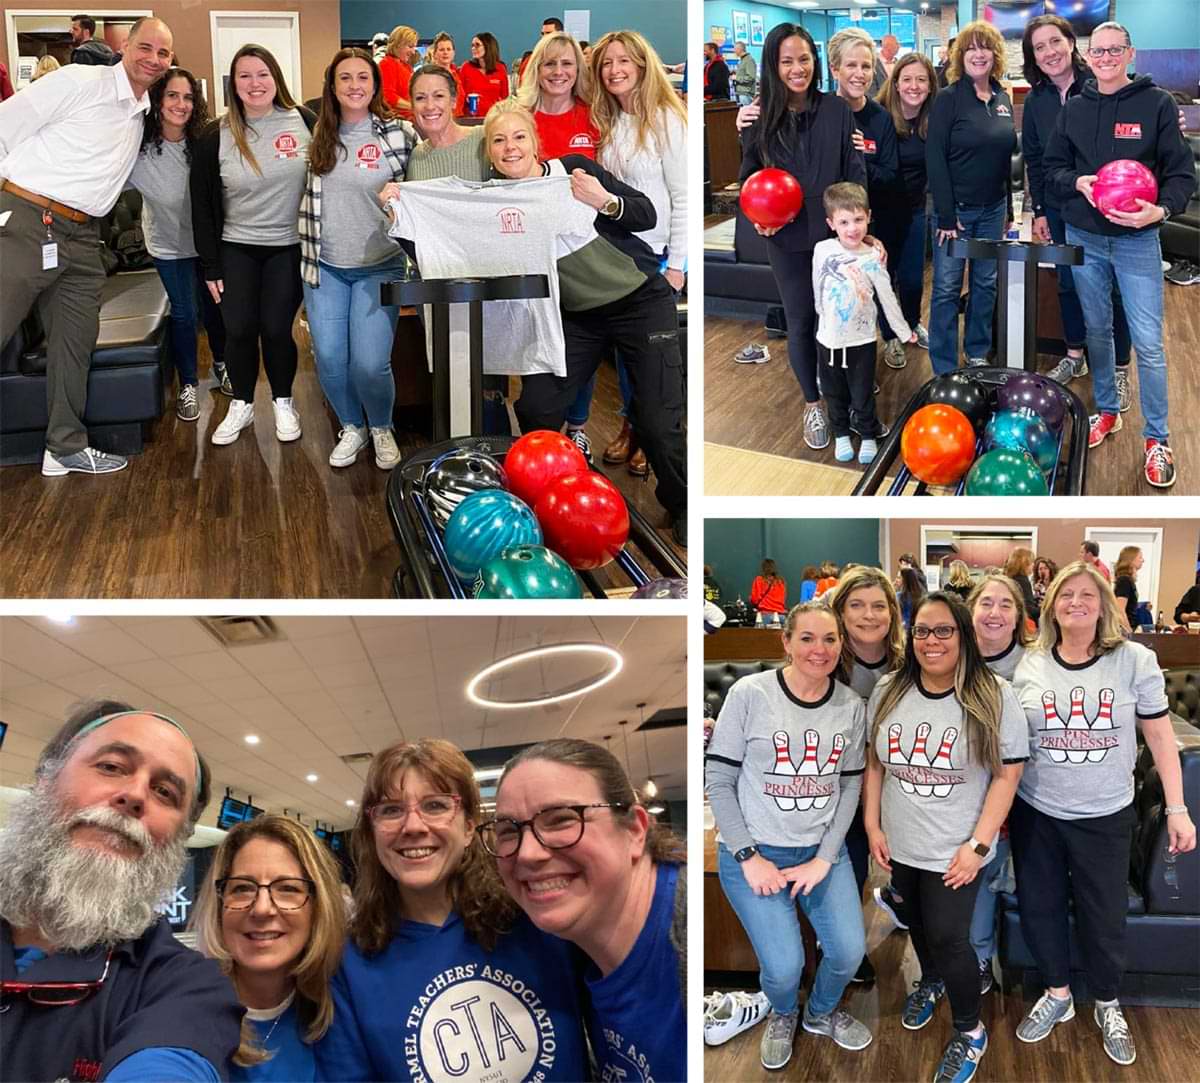 groups of teachers from the Rockland County Teachers Association during the seventh annual Rockland County TA Bowling Spectacular